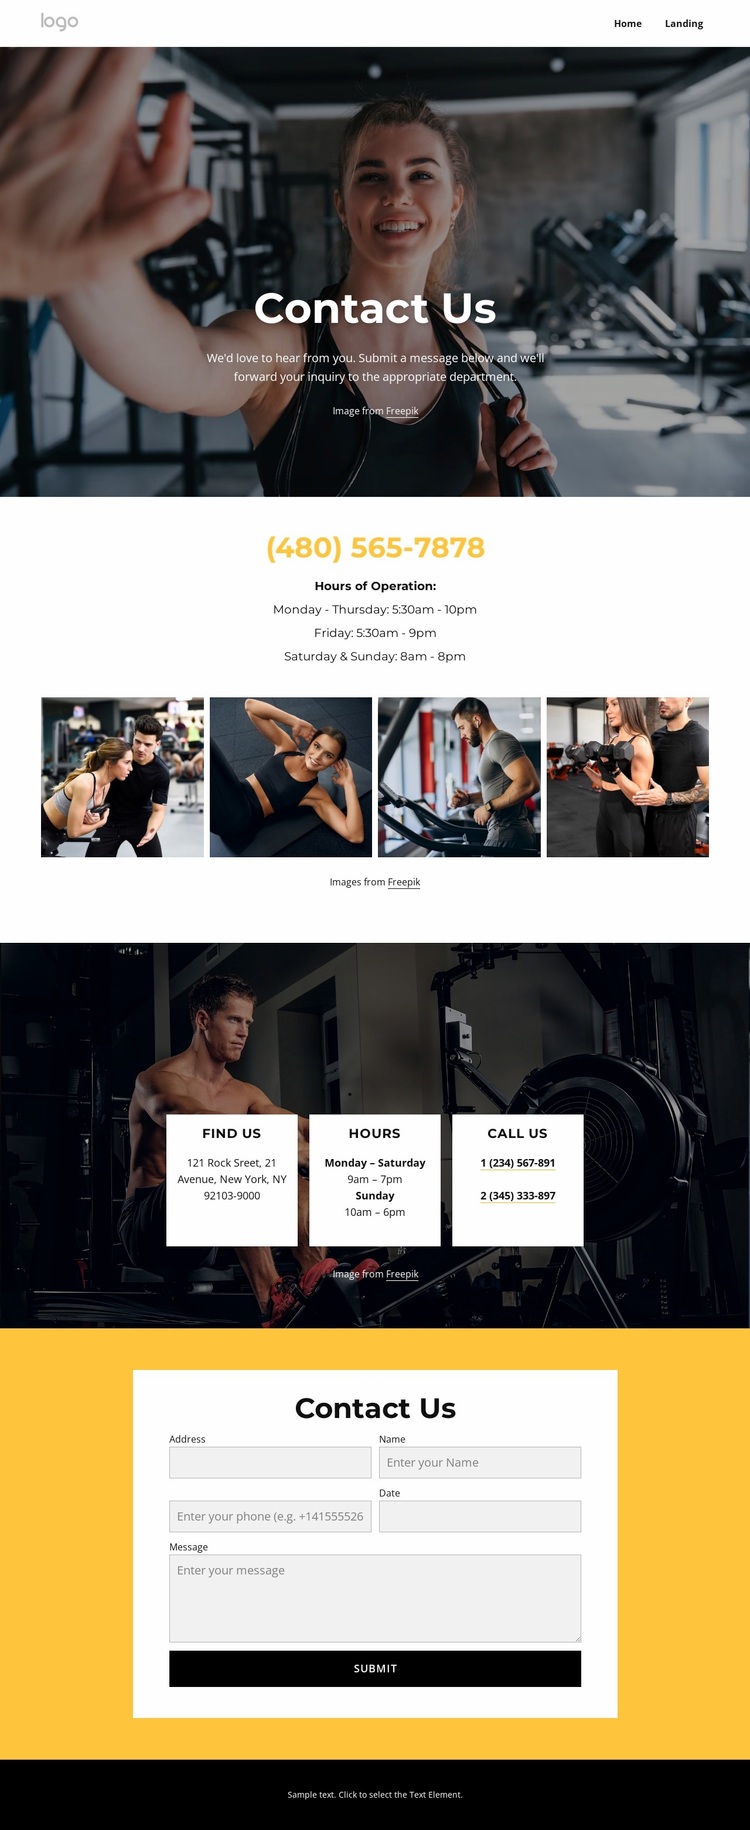 Personal training, group classes Website Design